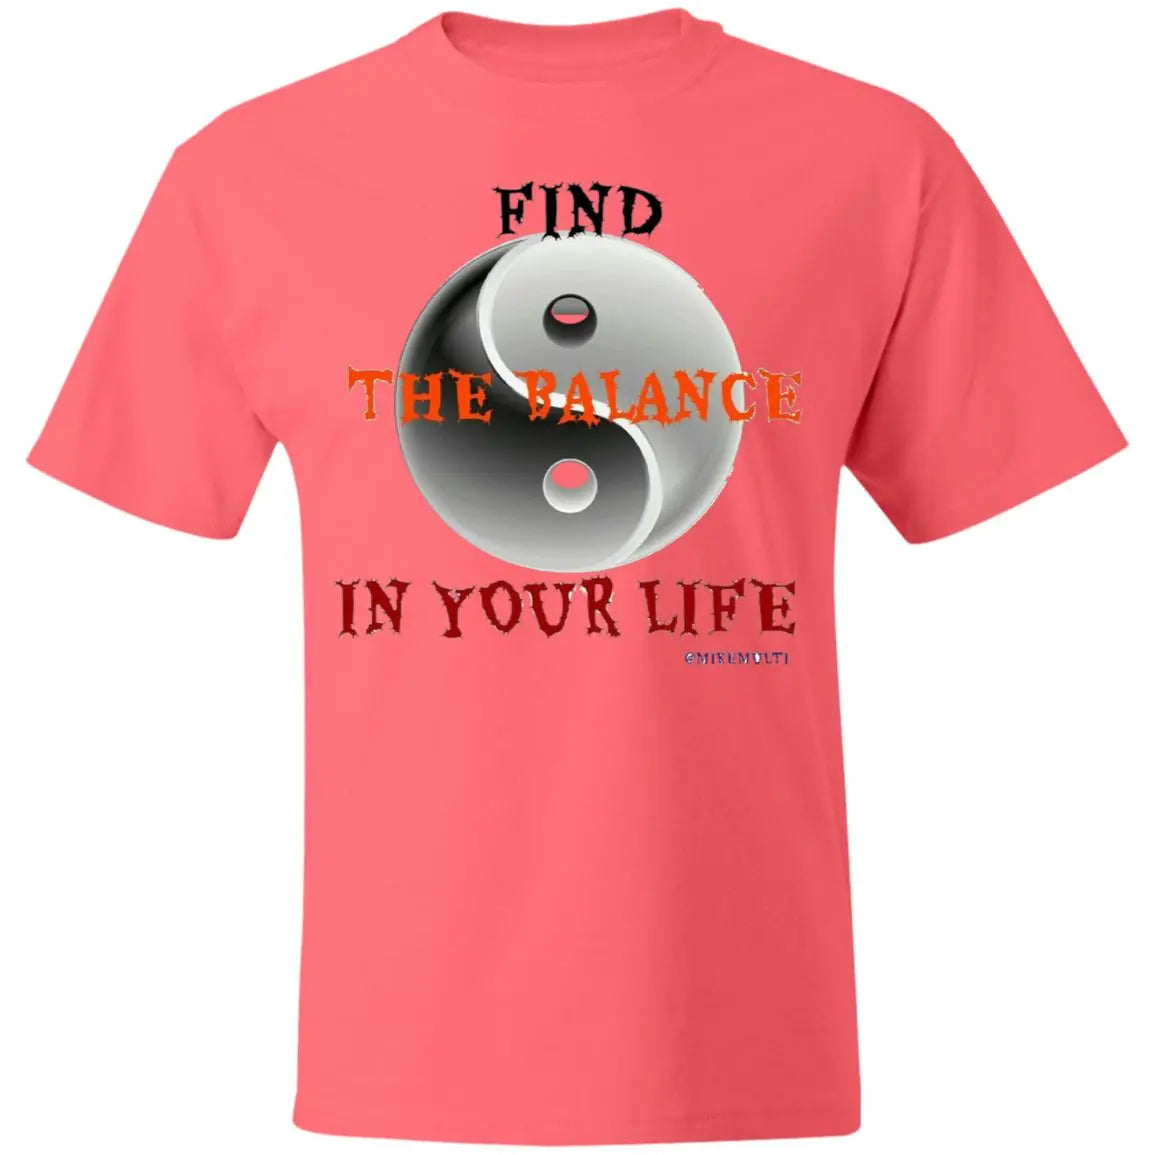 Find The Balance In Your Life - Men's Beefy T-Shirt CustomCat